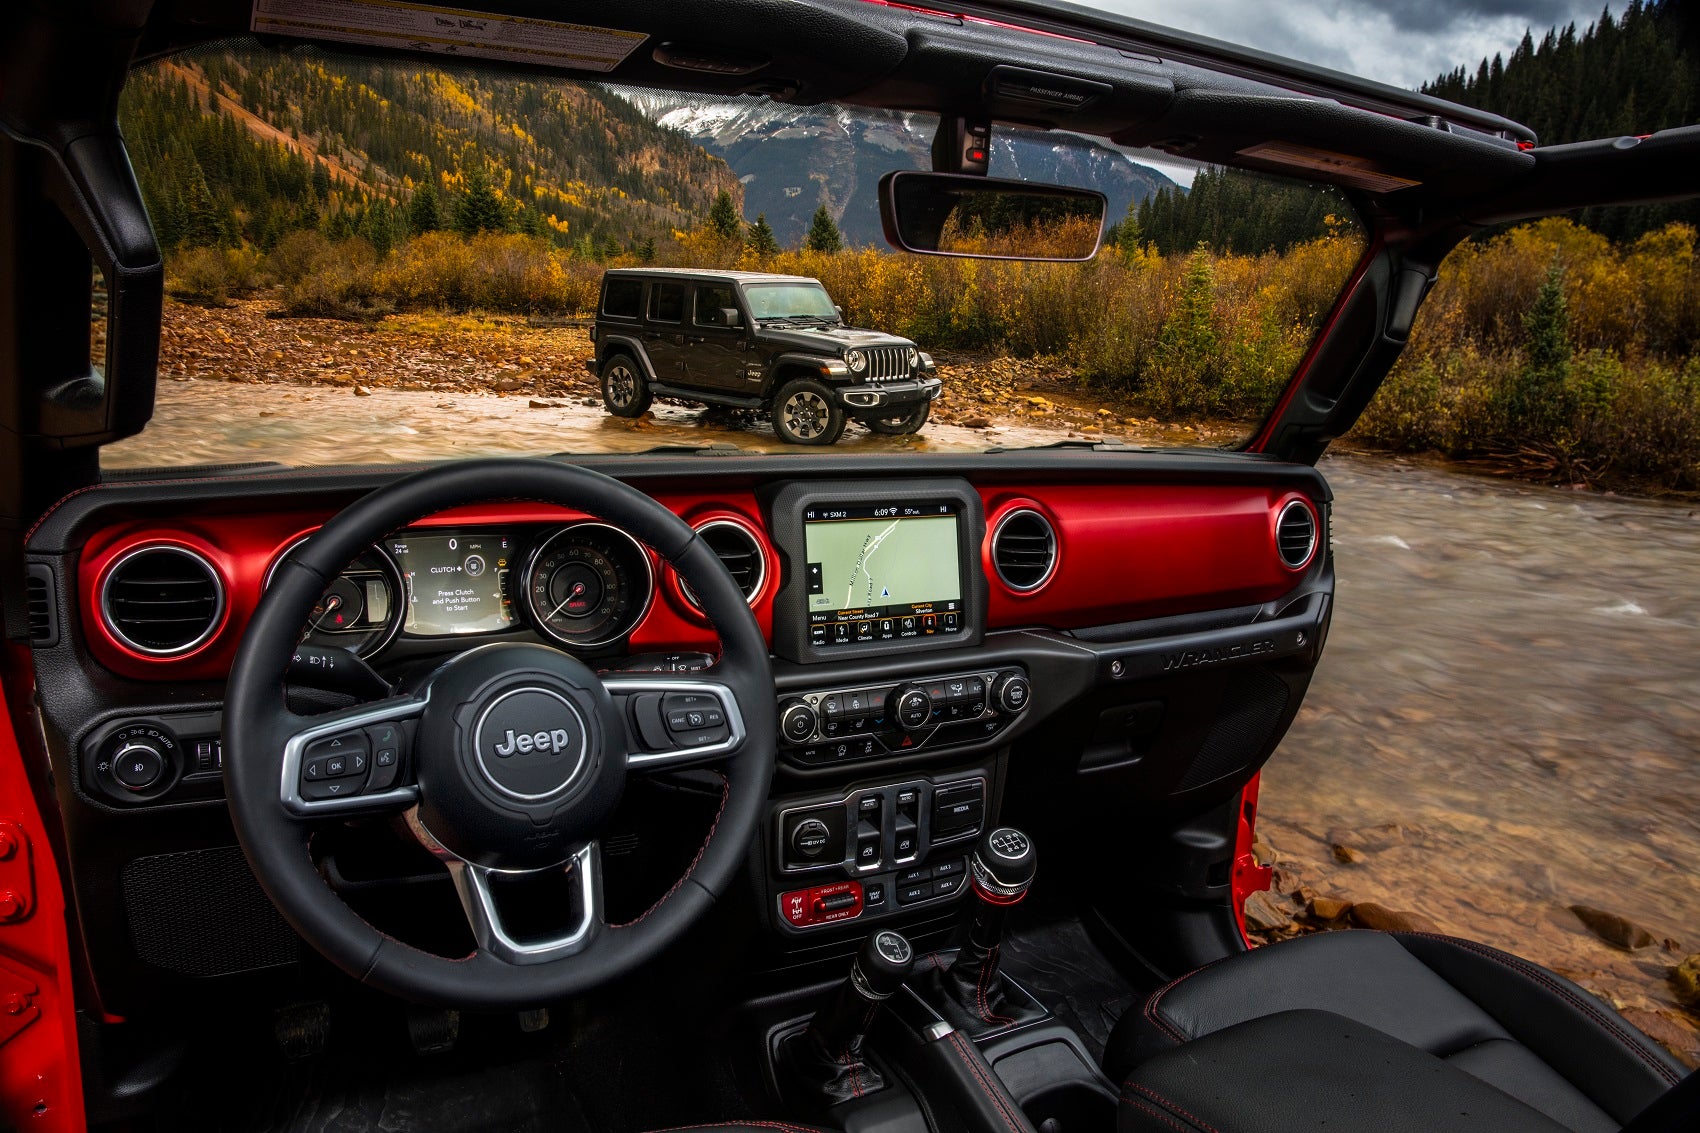 2020 Jeep Wrangler Unlimited Review